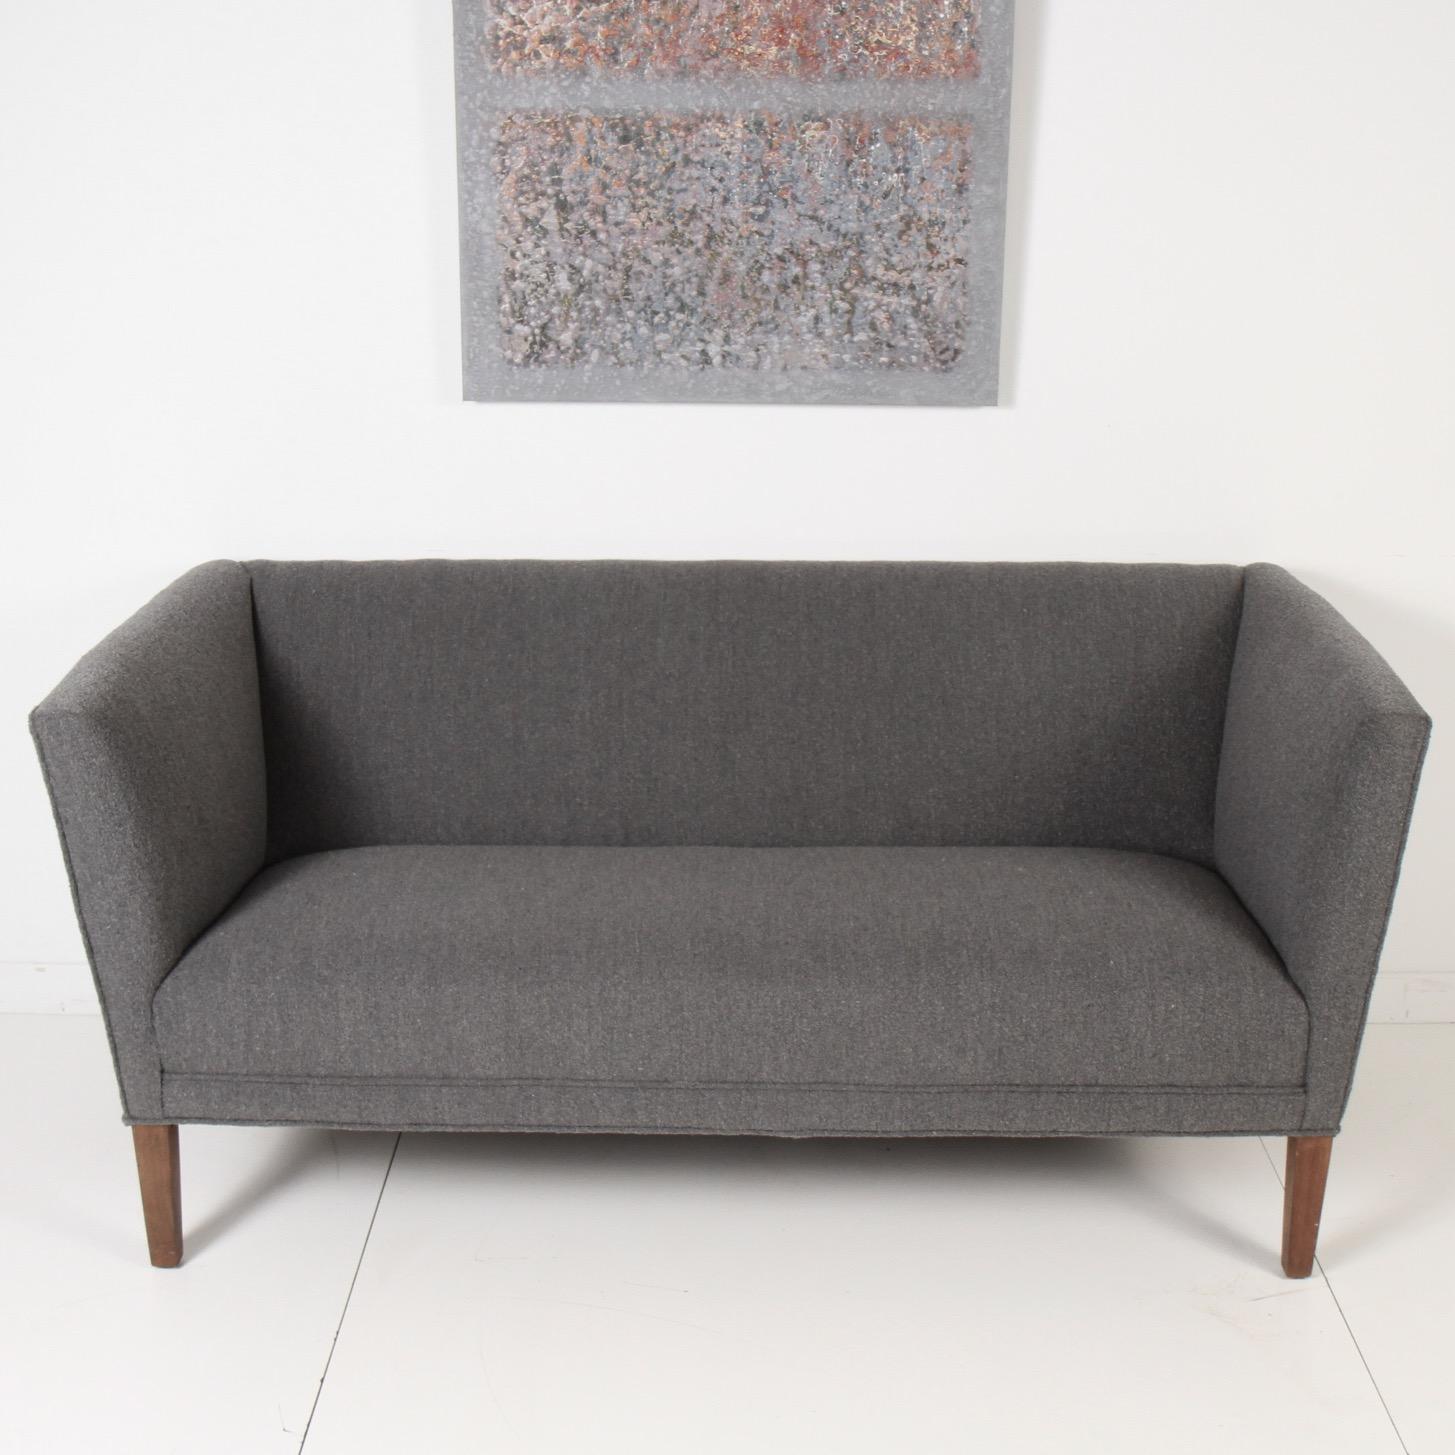 An early Grete Jalk high back settee on walnut legs upholstered in medium grey bouclé´. Made in 1950s Denmark by Johannes Hansen. 

In 1953, Jalk opened her own design studio. Inspired by Alvar Aalto's laminated bent-plywood furniture and Charles